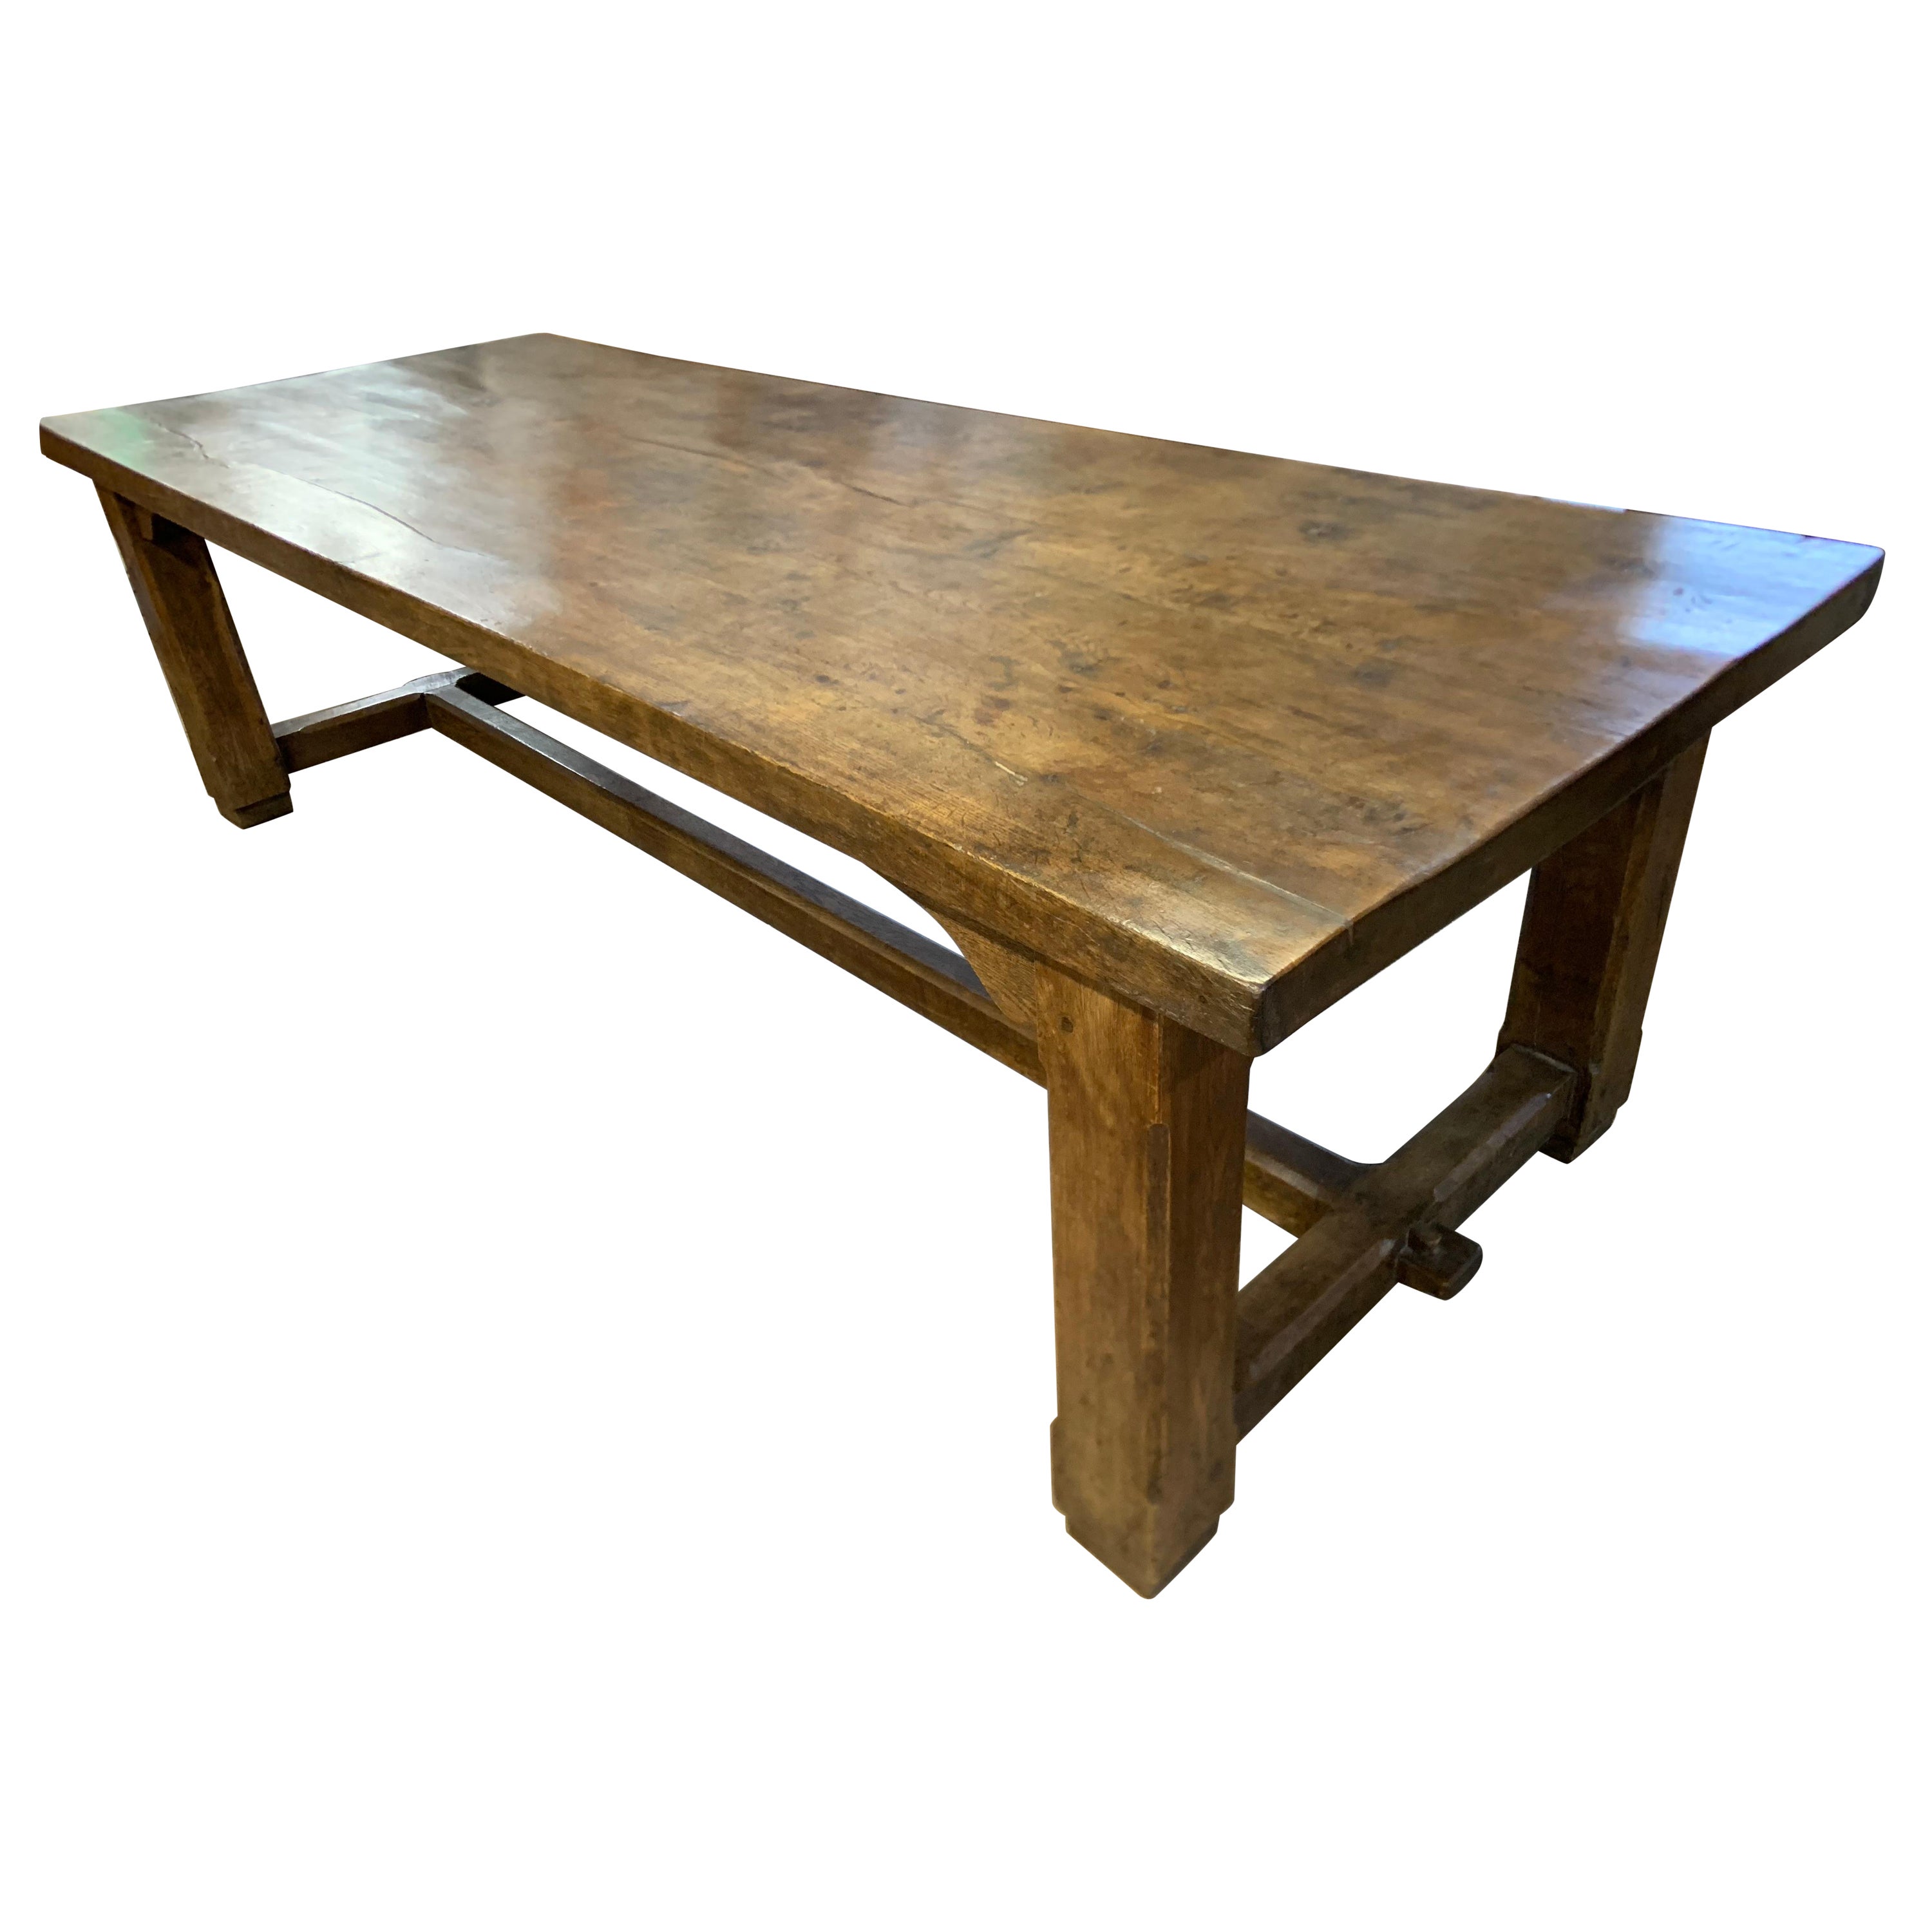 Large 18th Century Style Oak Refectory Dining Table